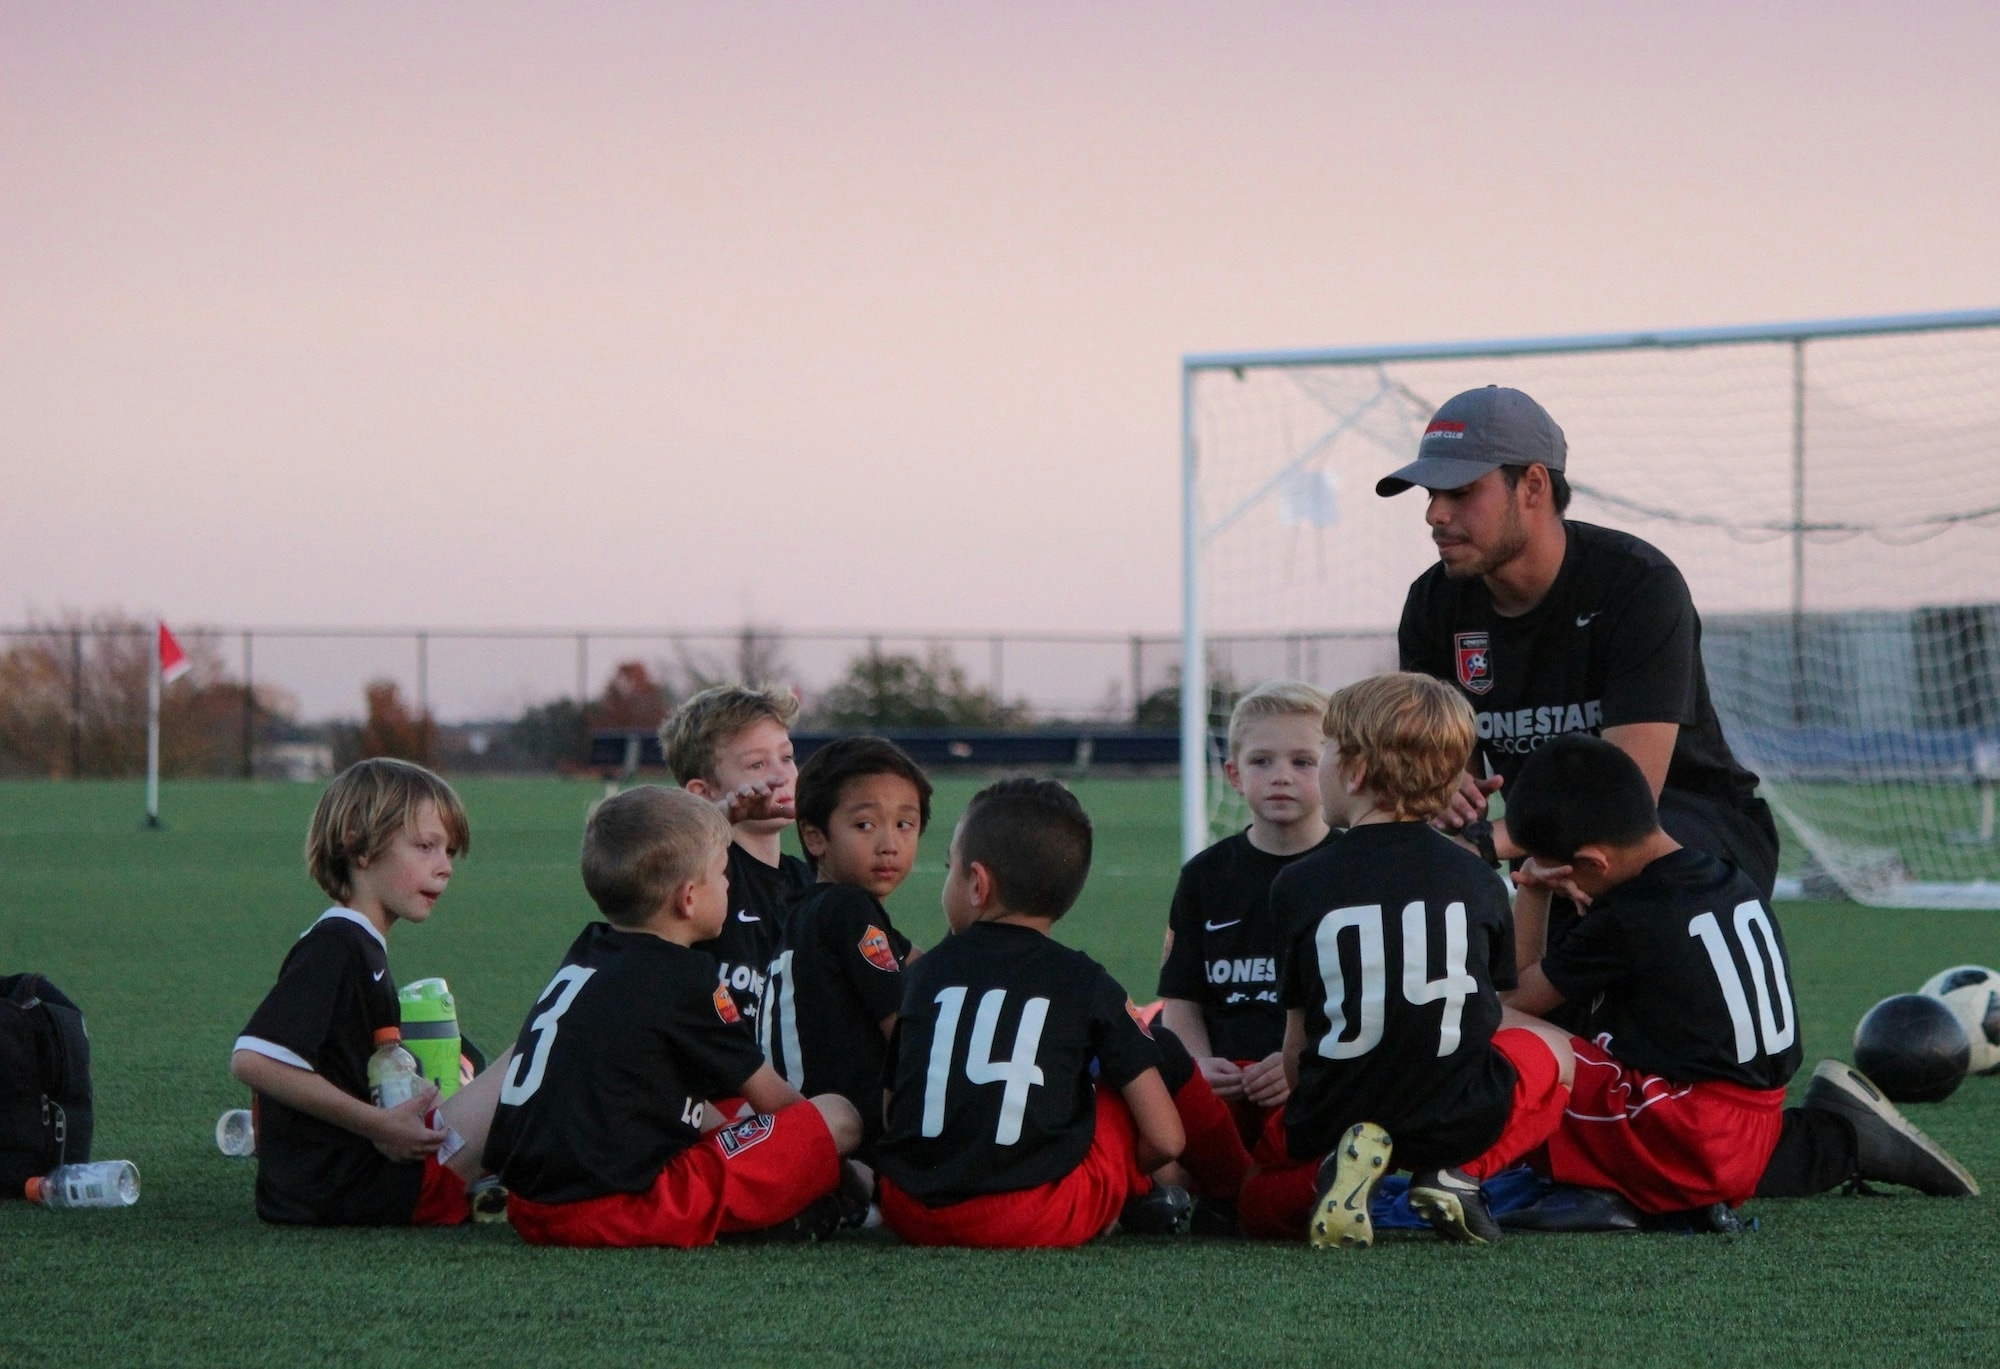 Student athlete coaching young soccer players